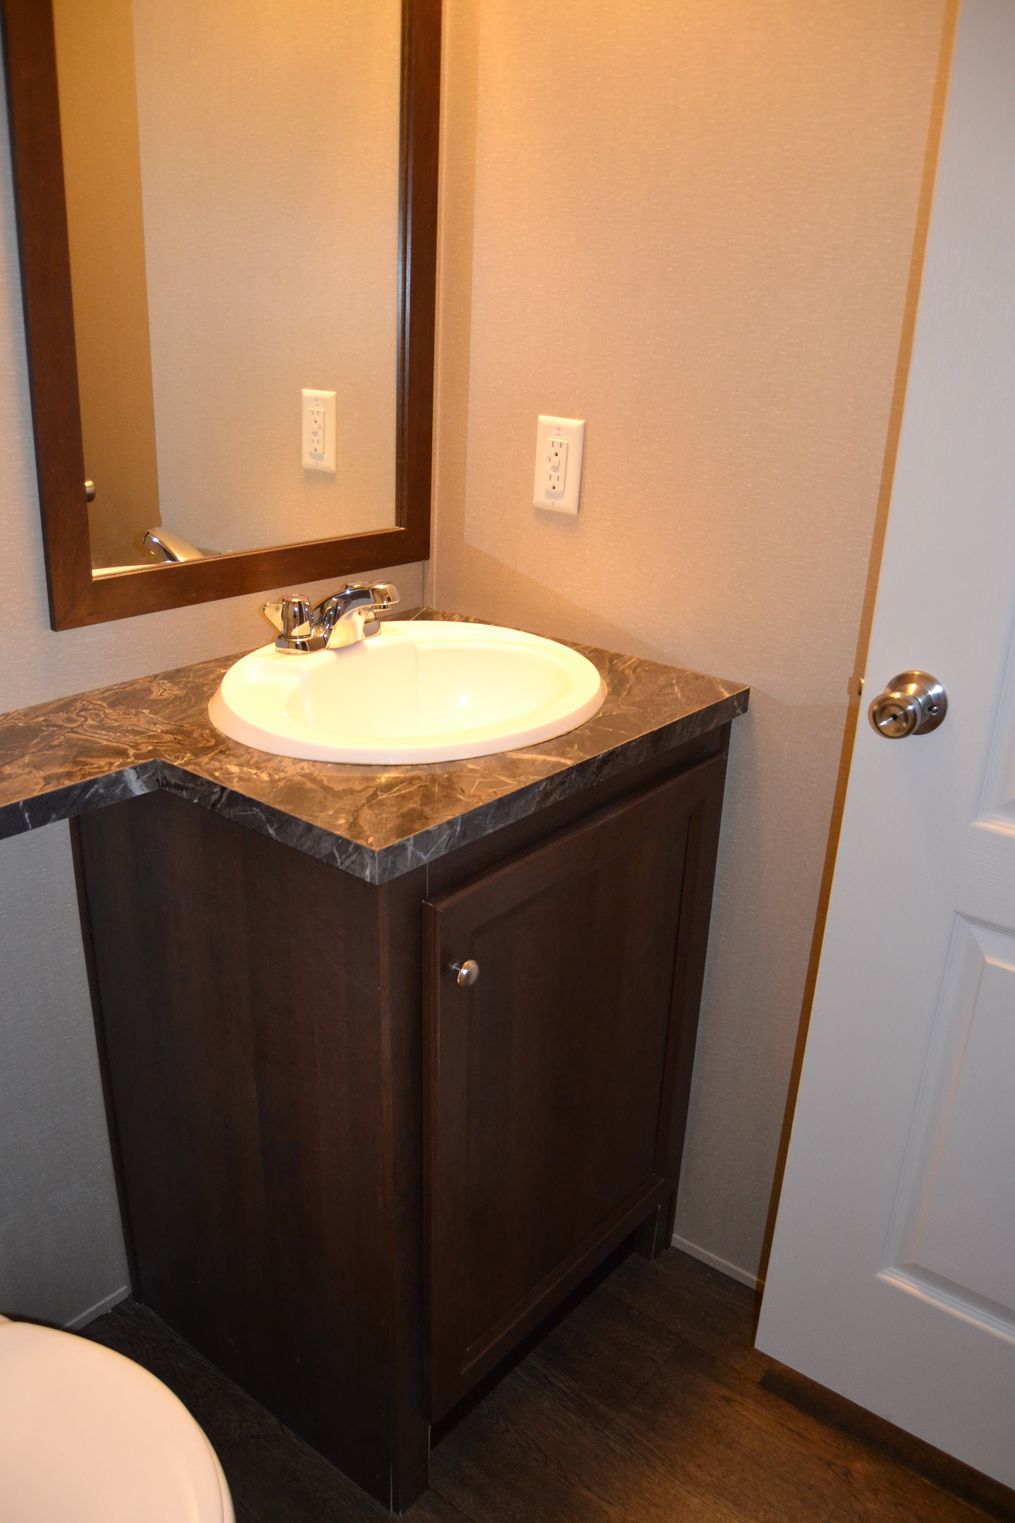 The MAPLE 7014-660 Master Bathroom. This Manufactured Mobile Home features 3 bedrooms and 2 baths.